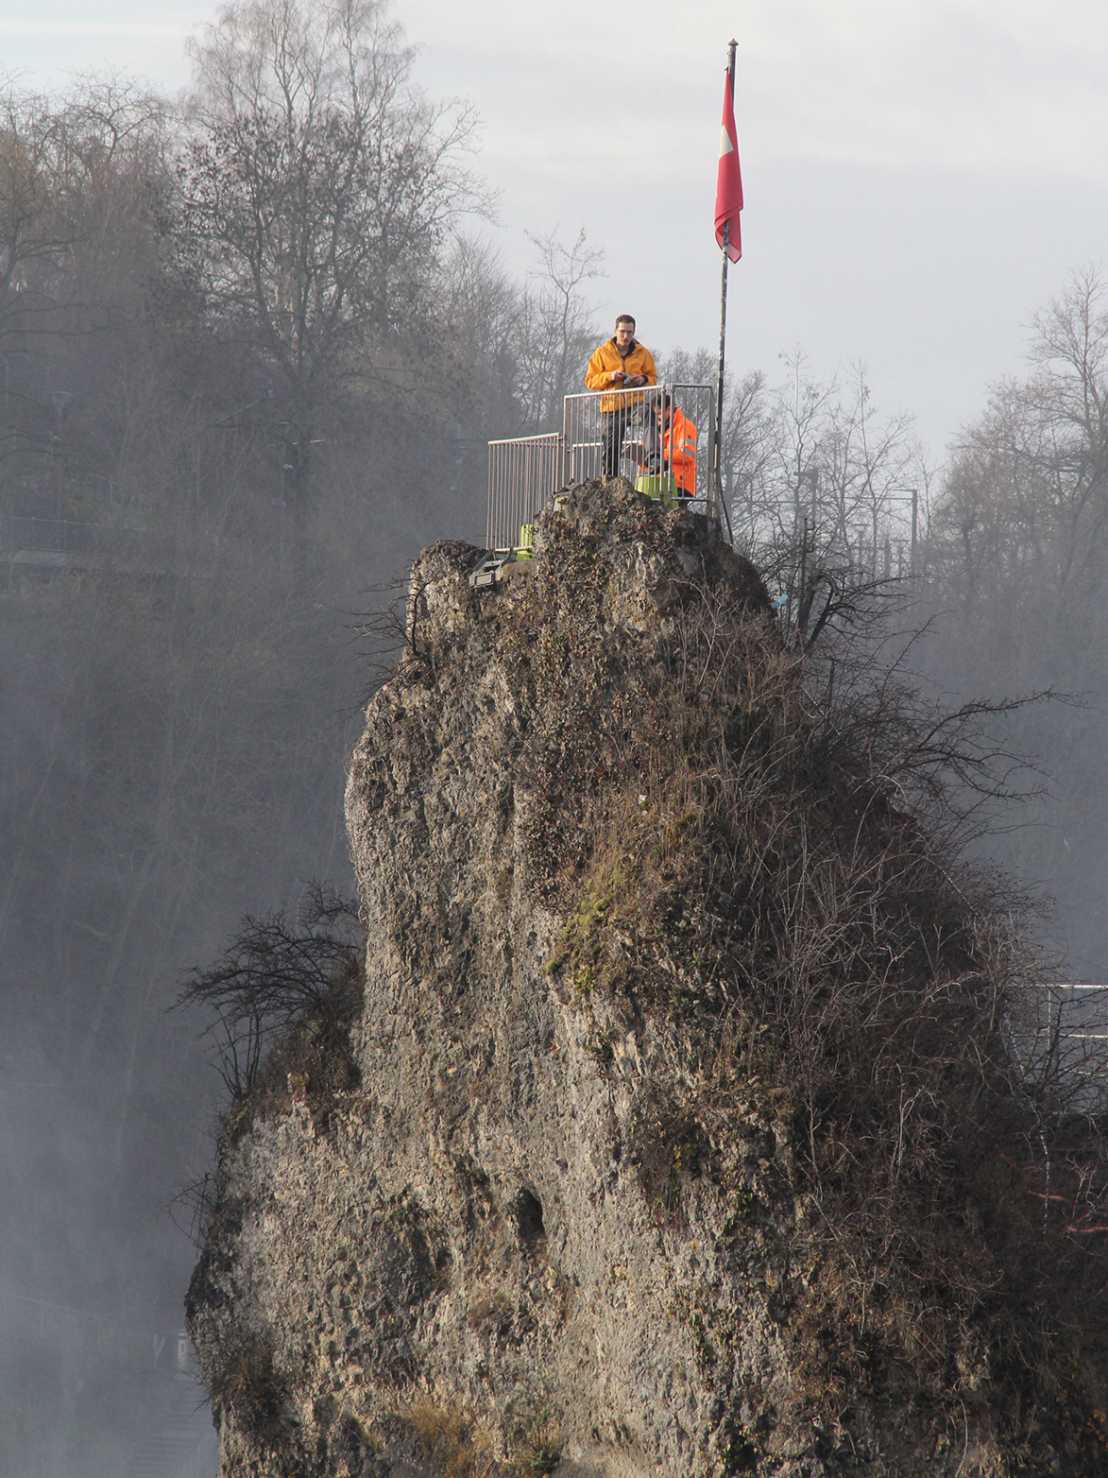 Mauro Häusler has set up a monitoring device on the visitor platform of the Rhine Falls Rock.